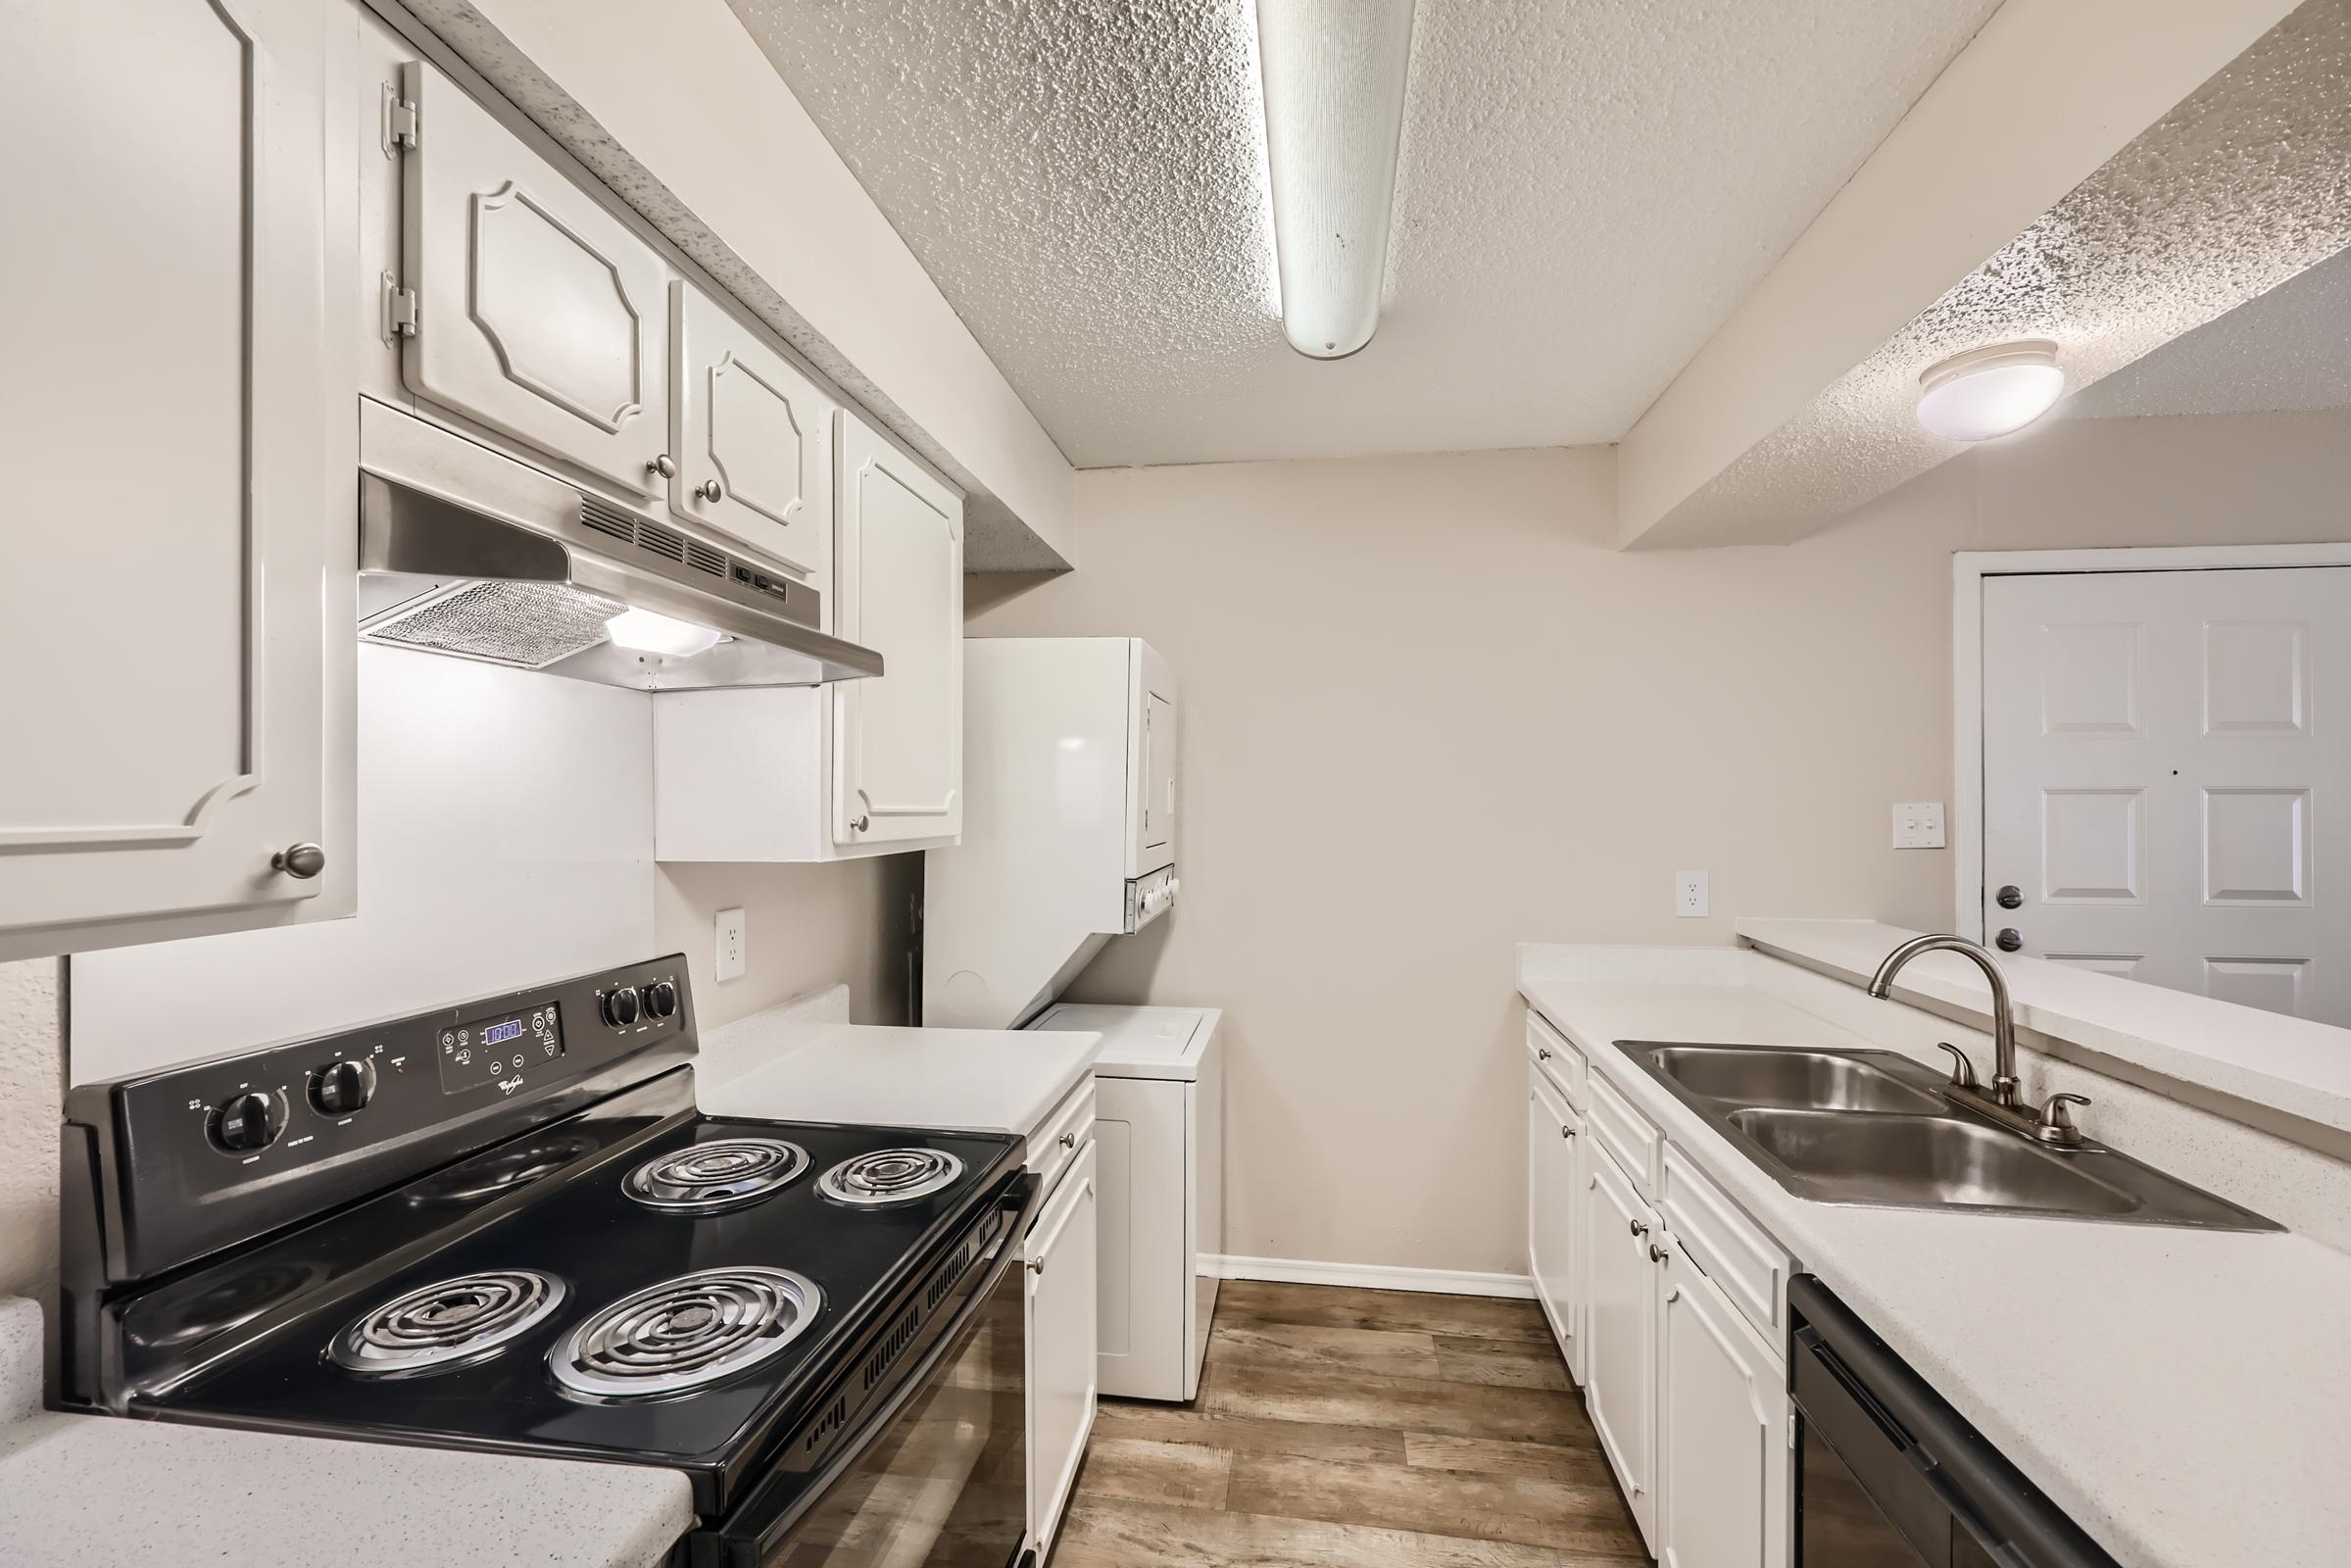 A kitchen with white cupboards and black appliances at Rise Oak Creek.